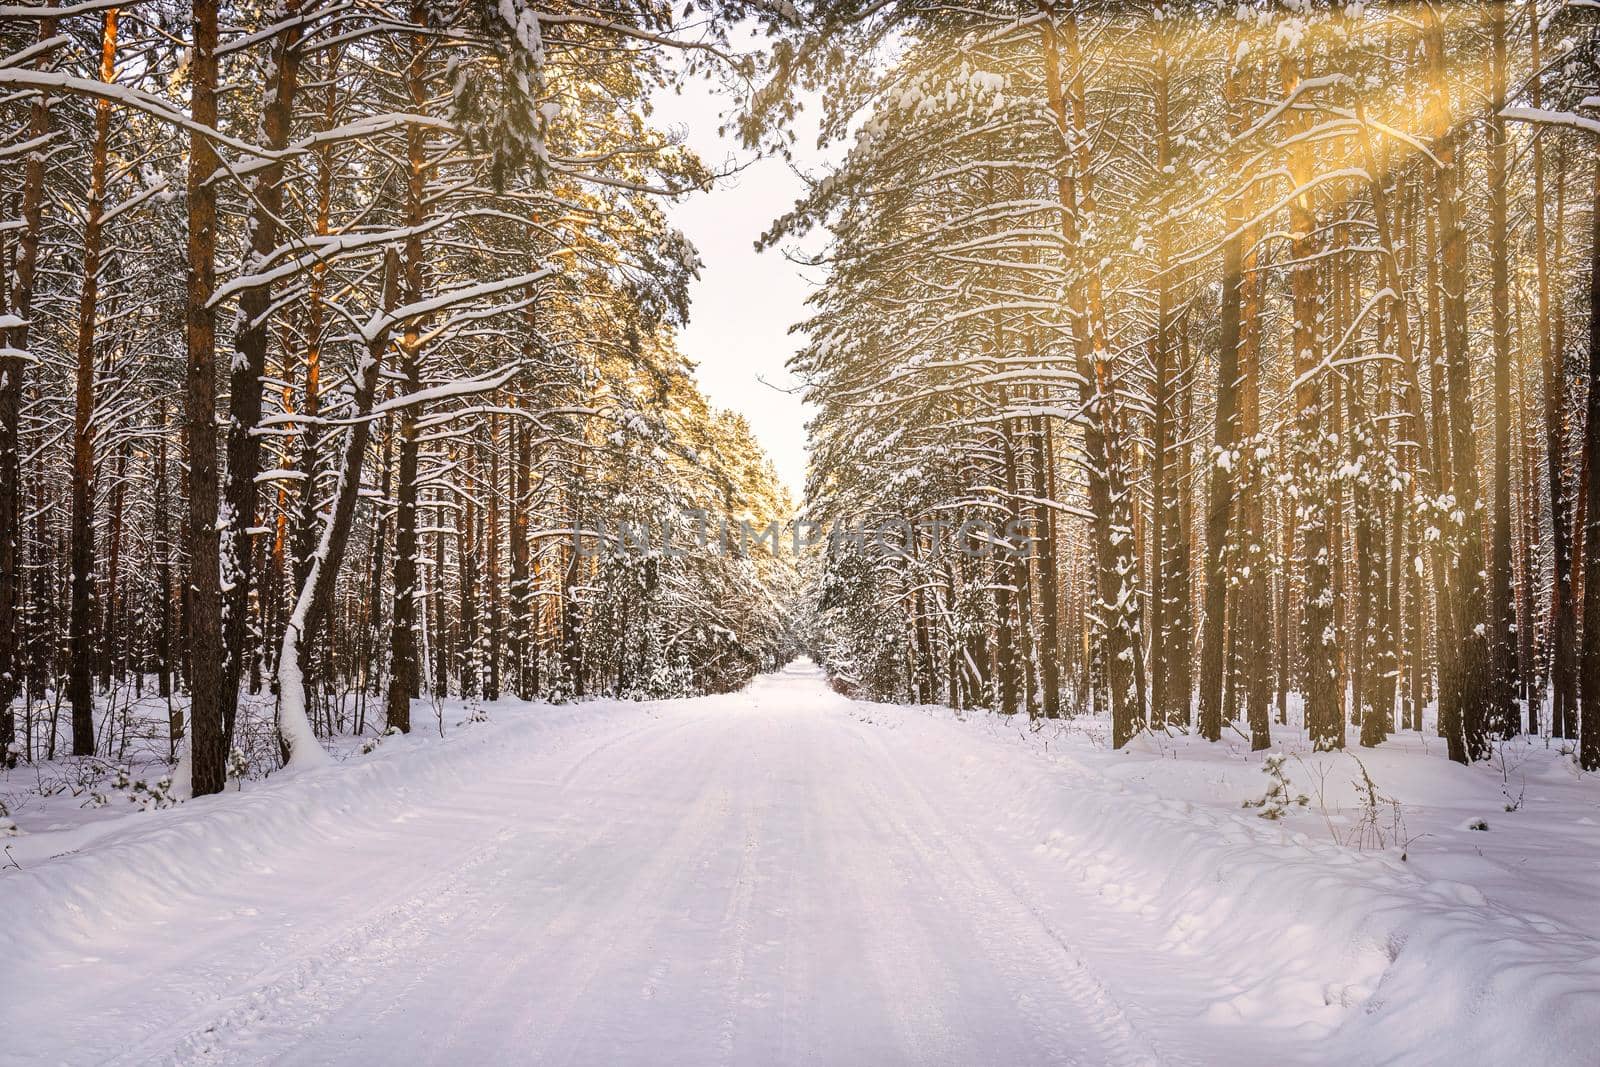 Automobile road through a pine winter forest covered with snow on a clear sunny day. Pines along the edges of the road and the rays of the sun shining through them.